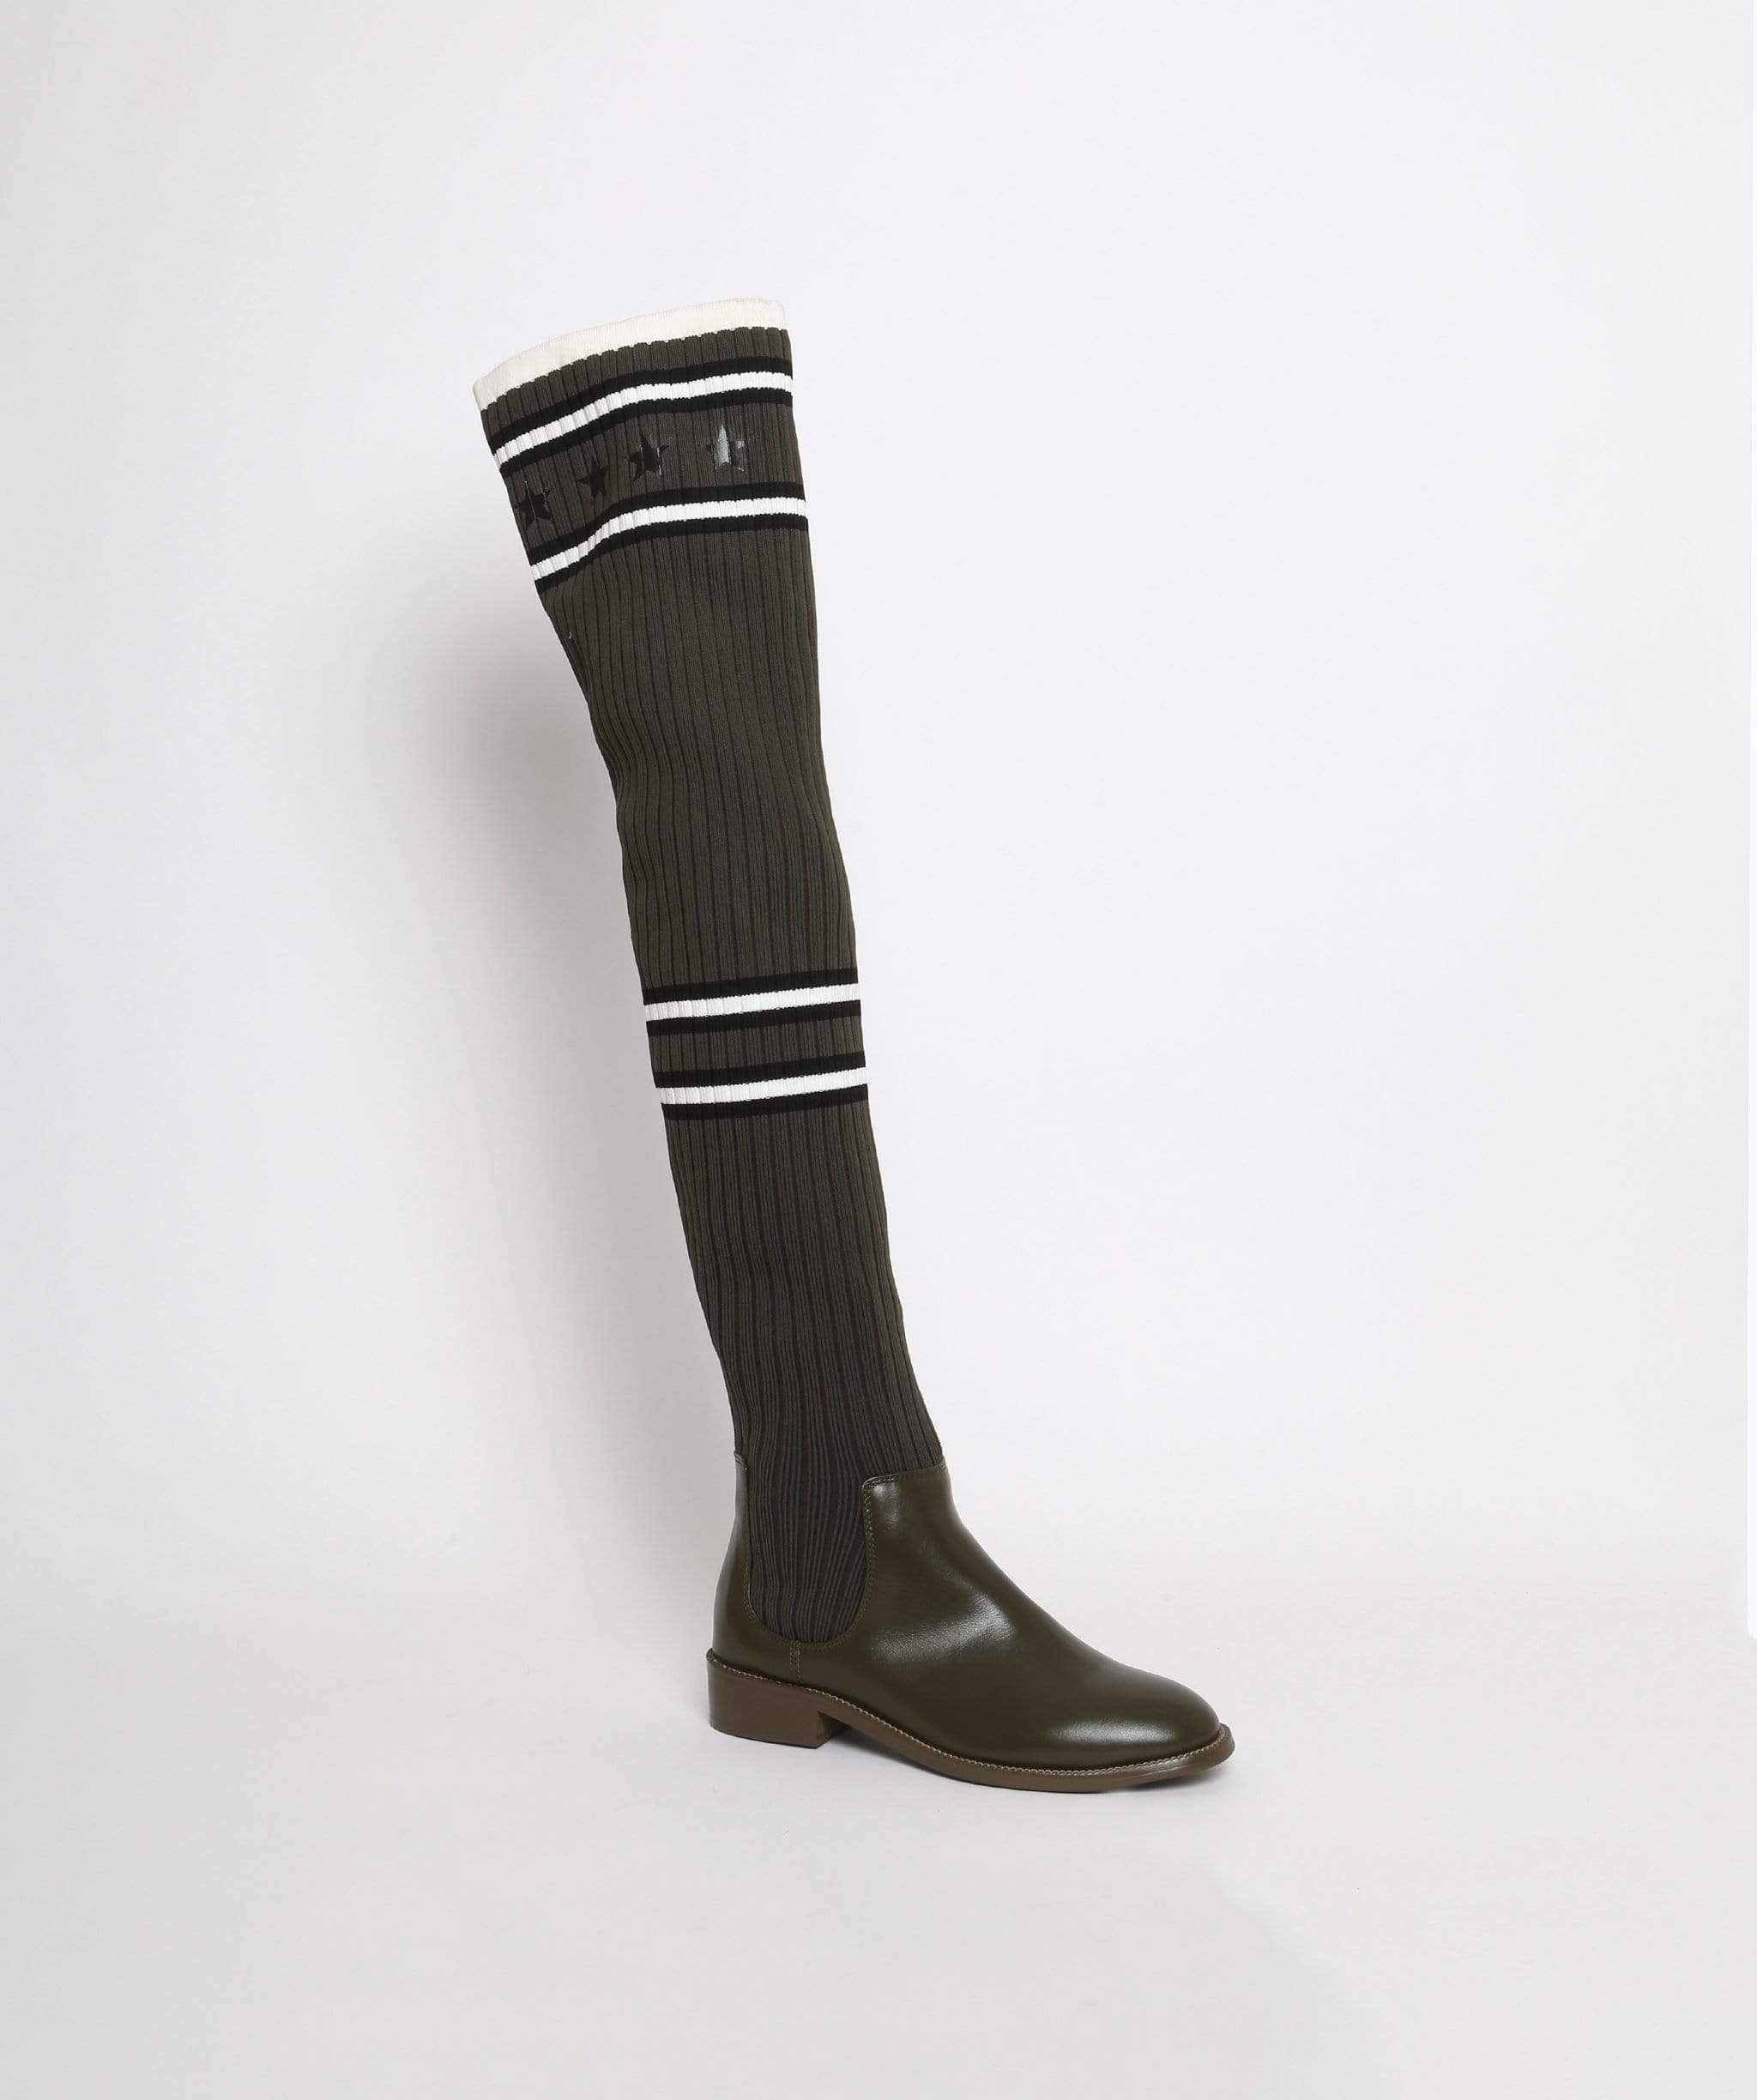 Givenchy sock Knee High boots Size 40